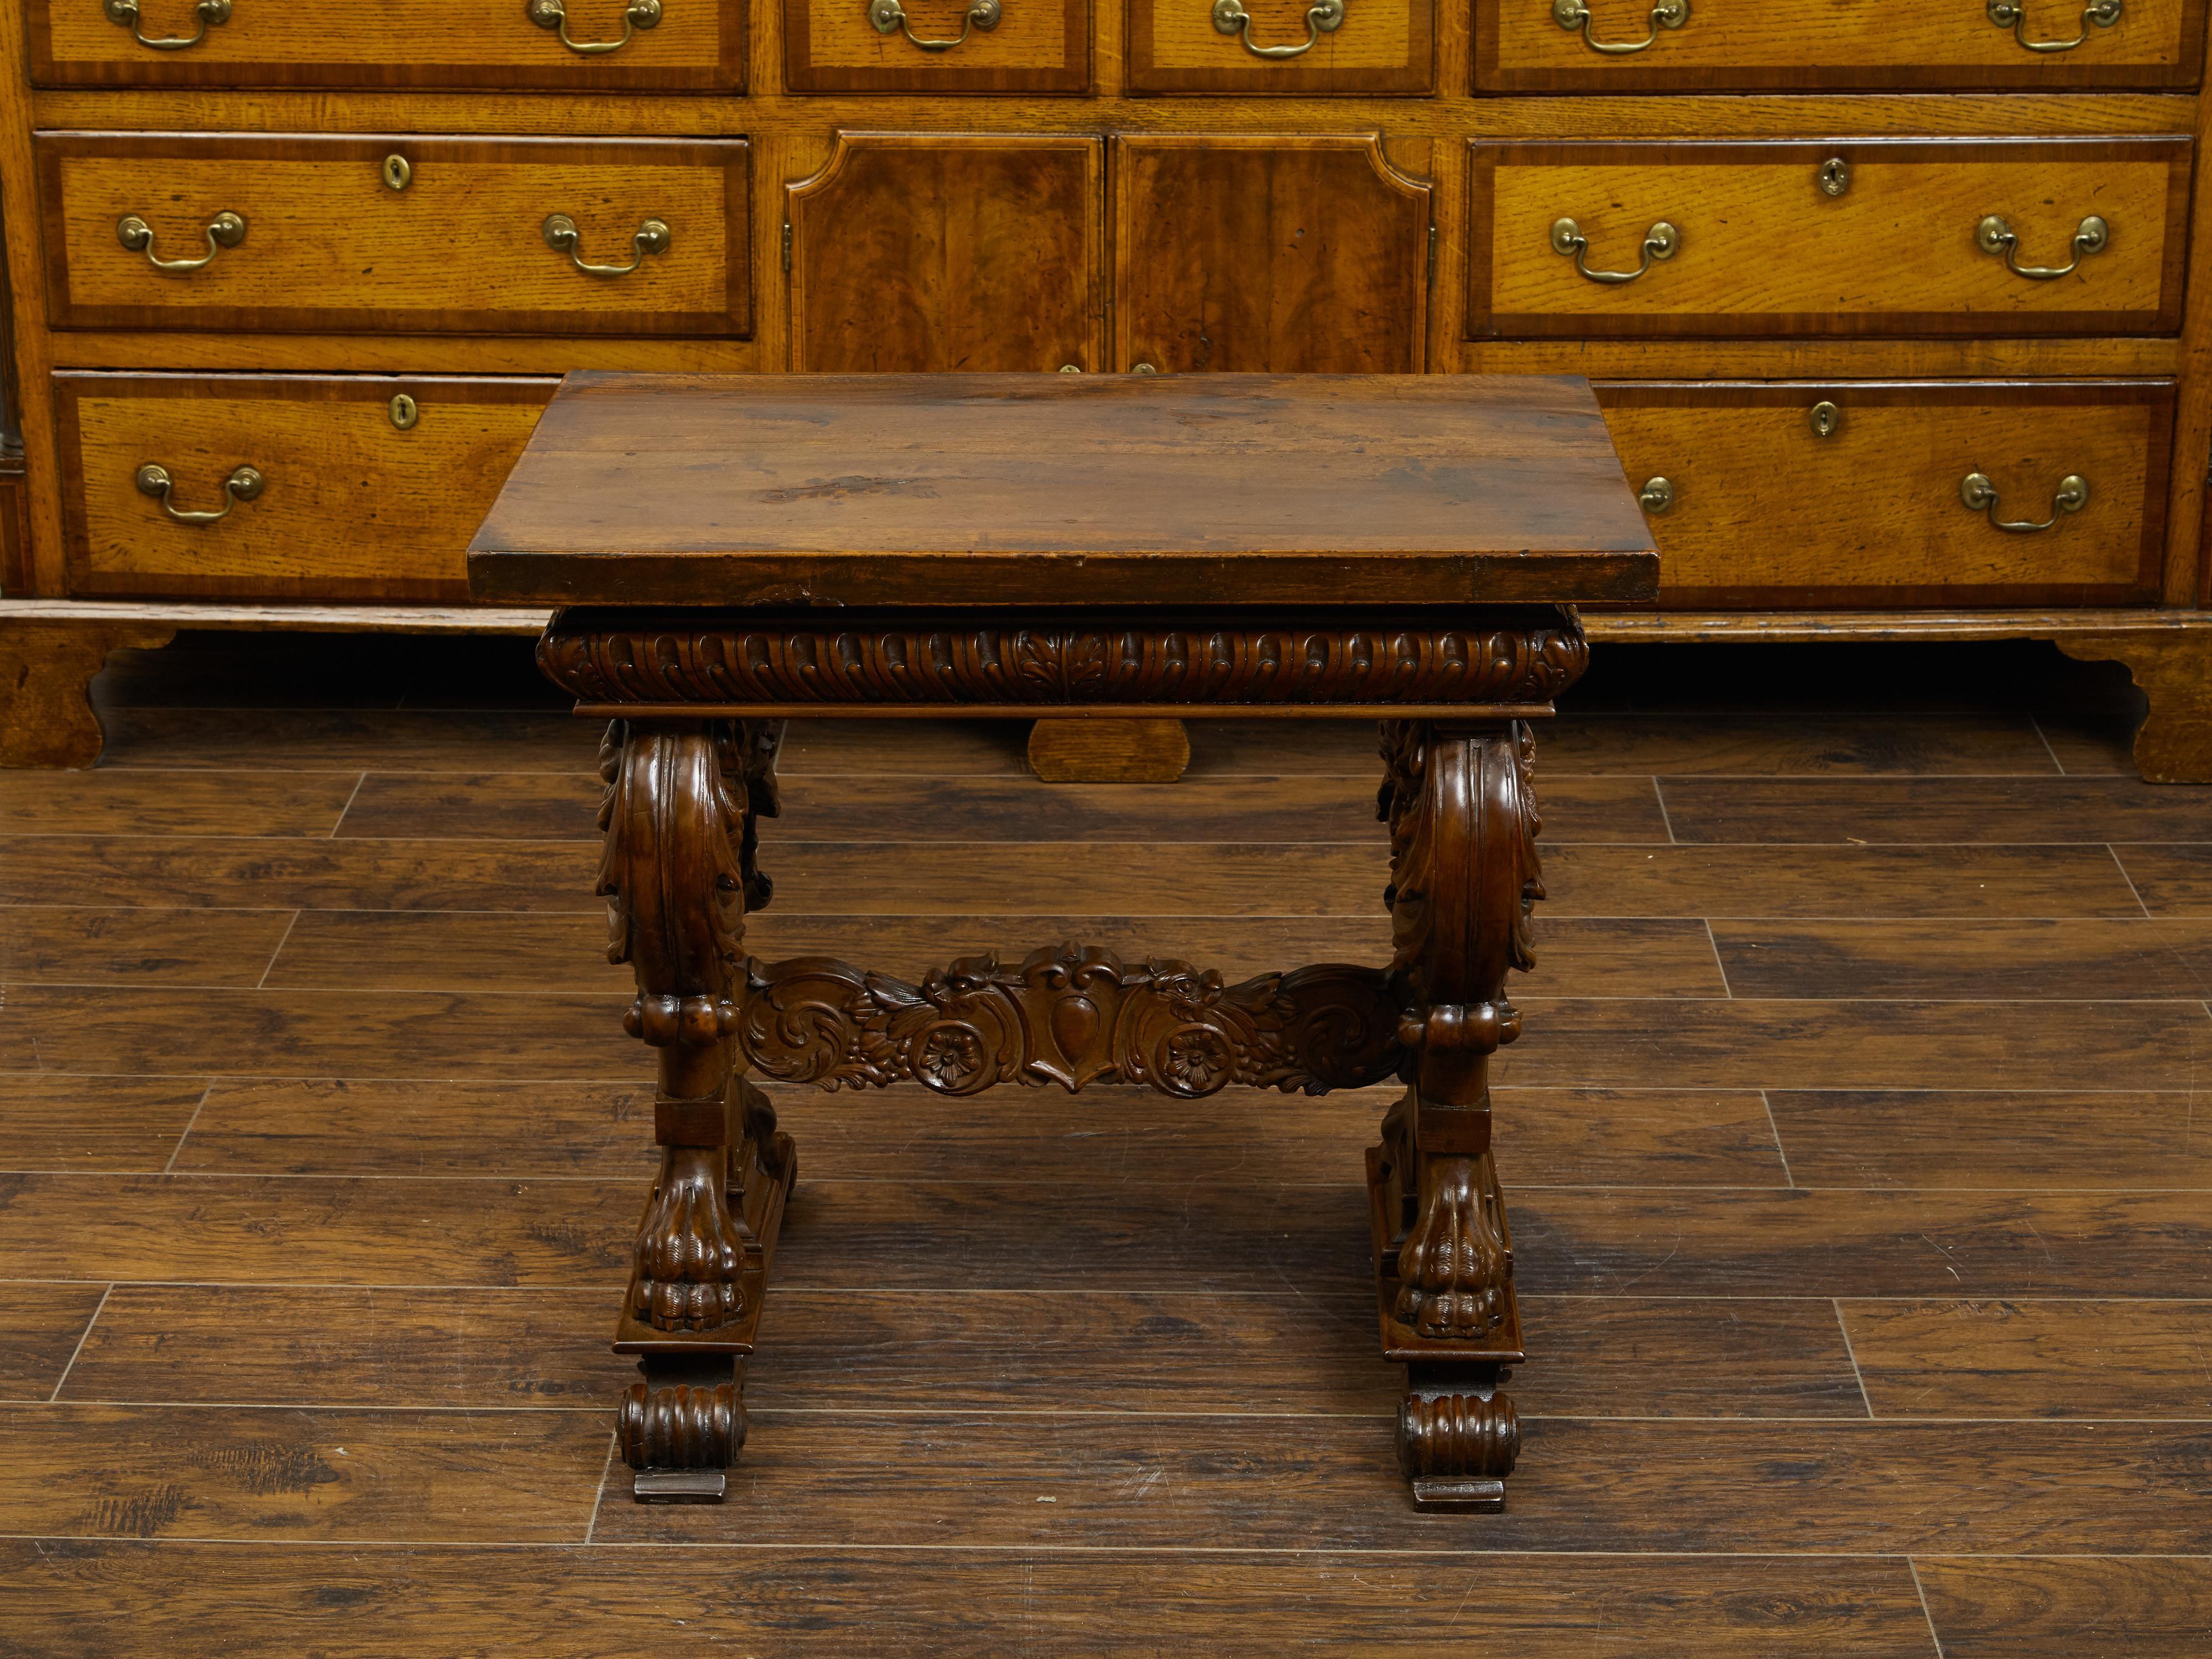 An Italian walnut small side table from the early 19th century, with lions' heads and richly carved trestle base. Created in Italy during the early years of the 19th century, this walnut side table features a rectangular top sitting above an apron